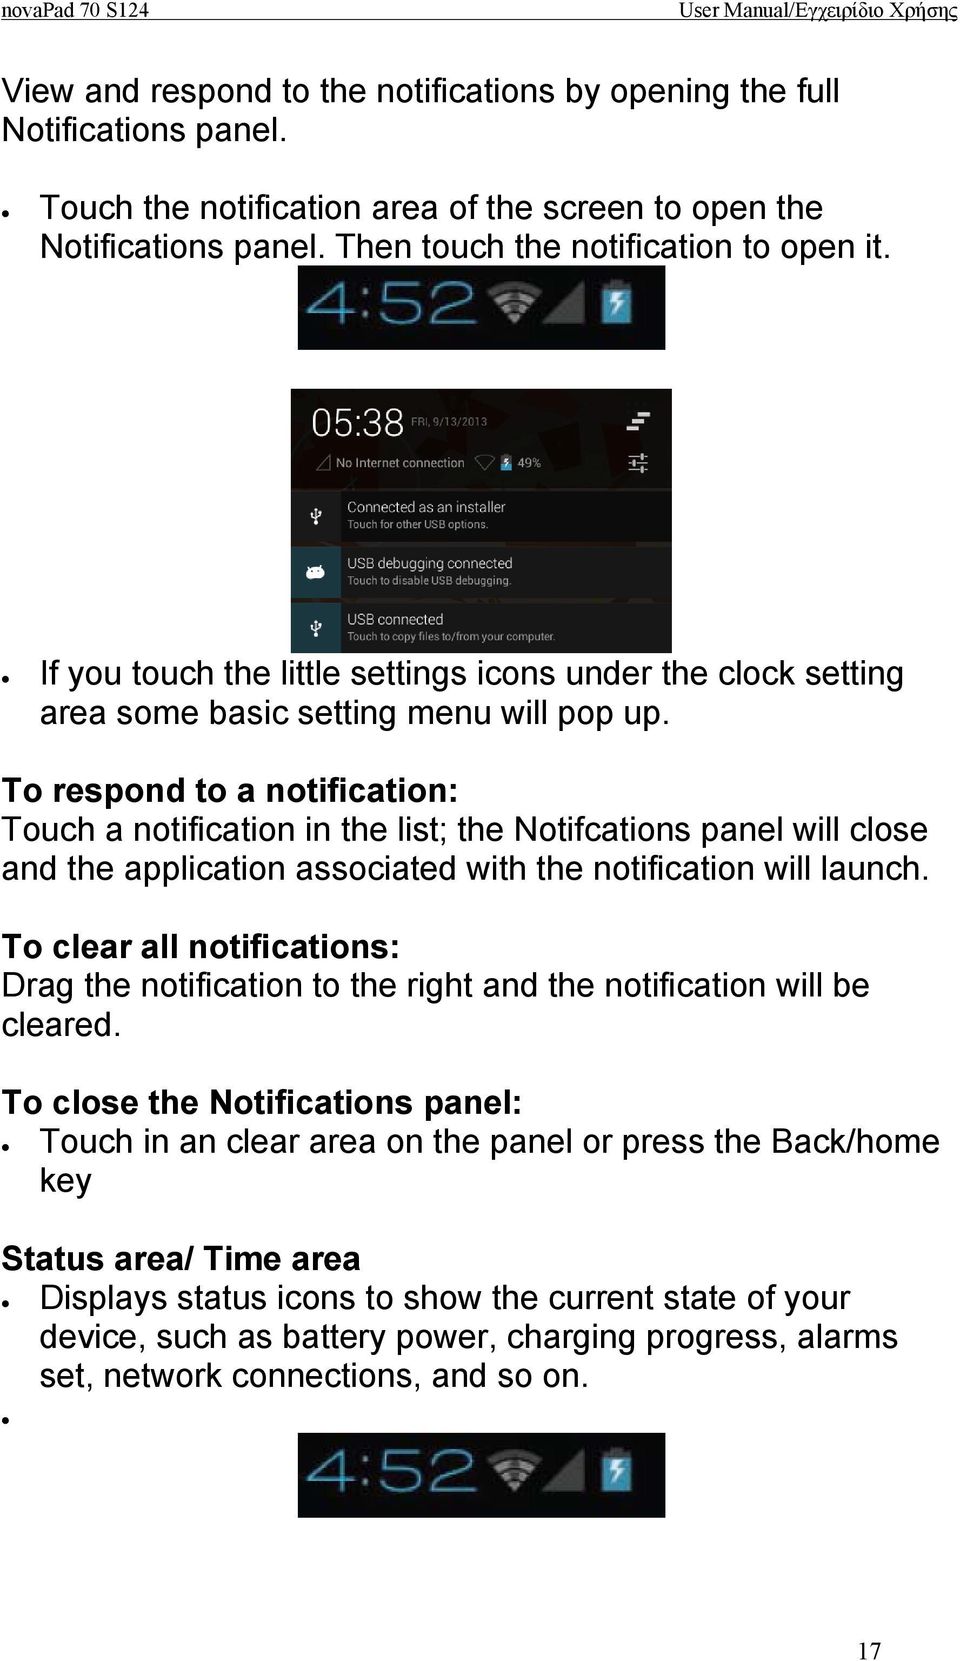 To respond to a notification: Touch a notification in the list; the Notifcations panel will close and the application associated with the notification will launch.